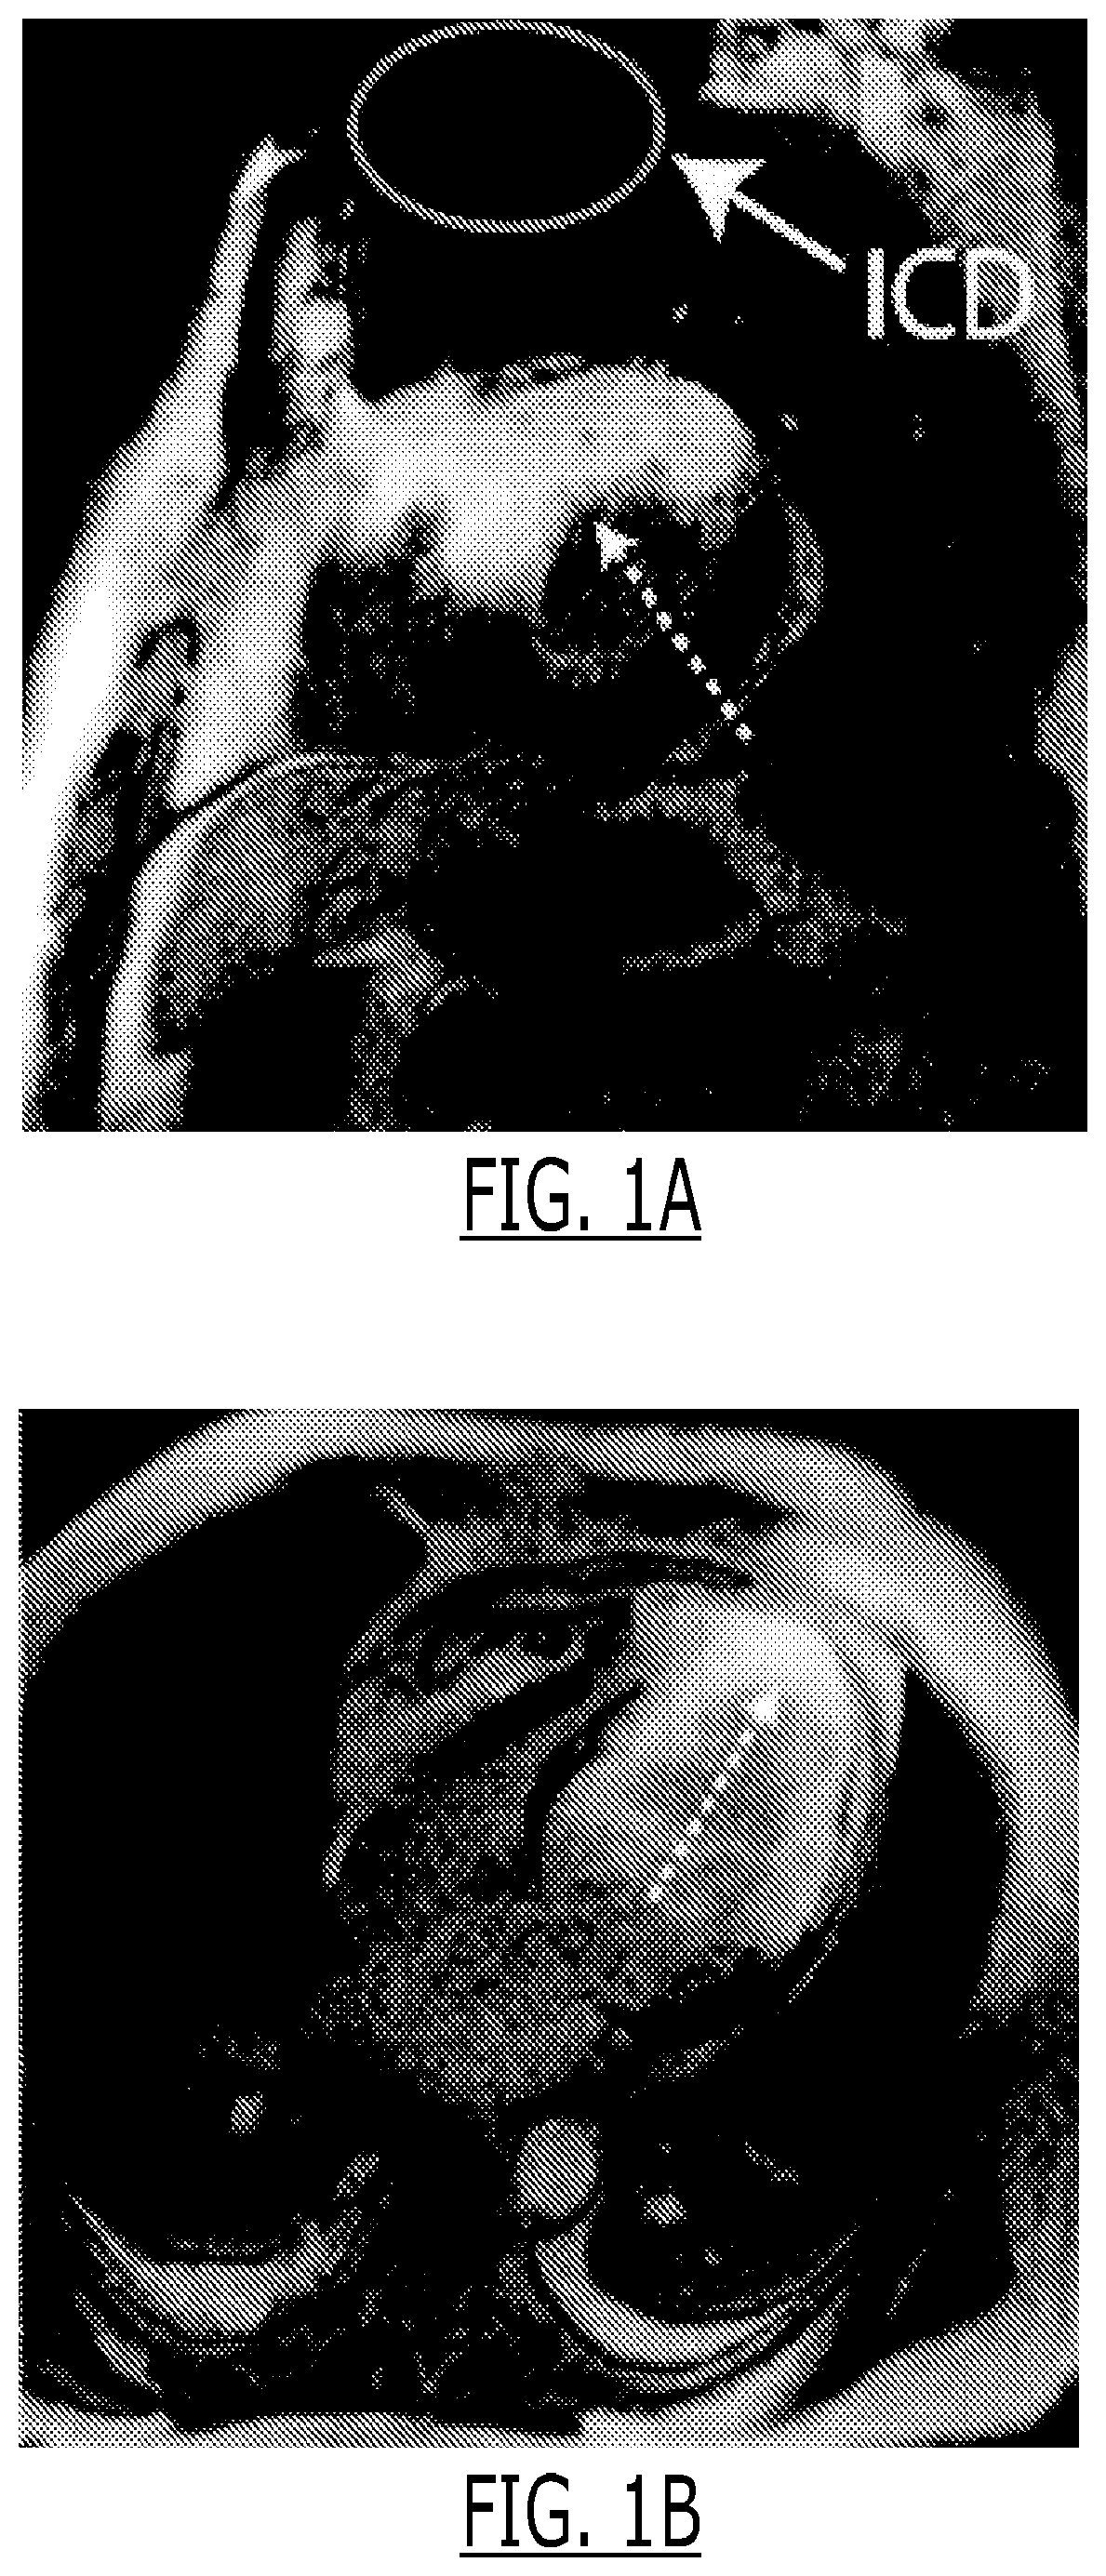 Cardiac late gadolinium enhancement MRI for patients with implanted cardiac devices